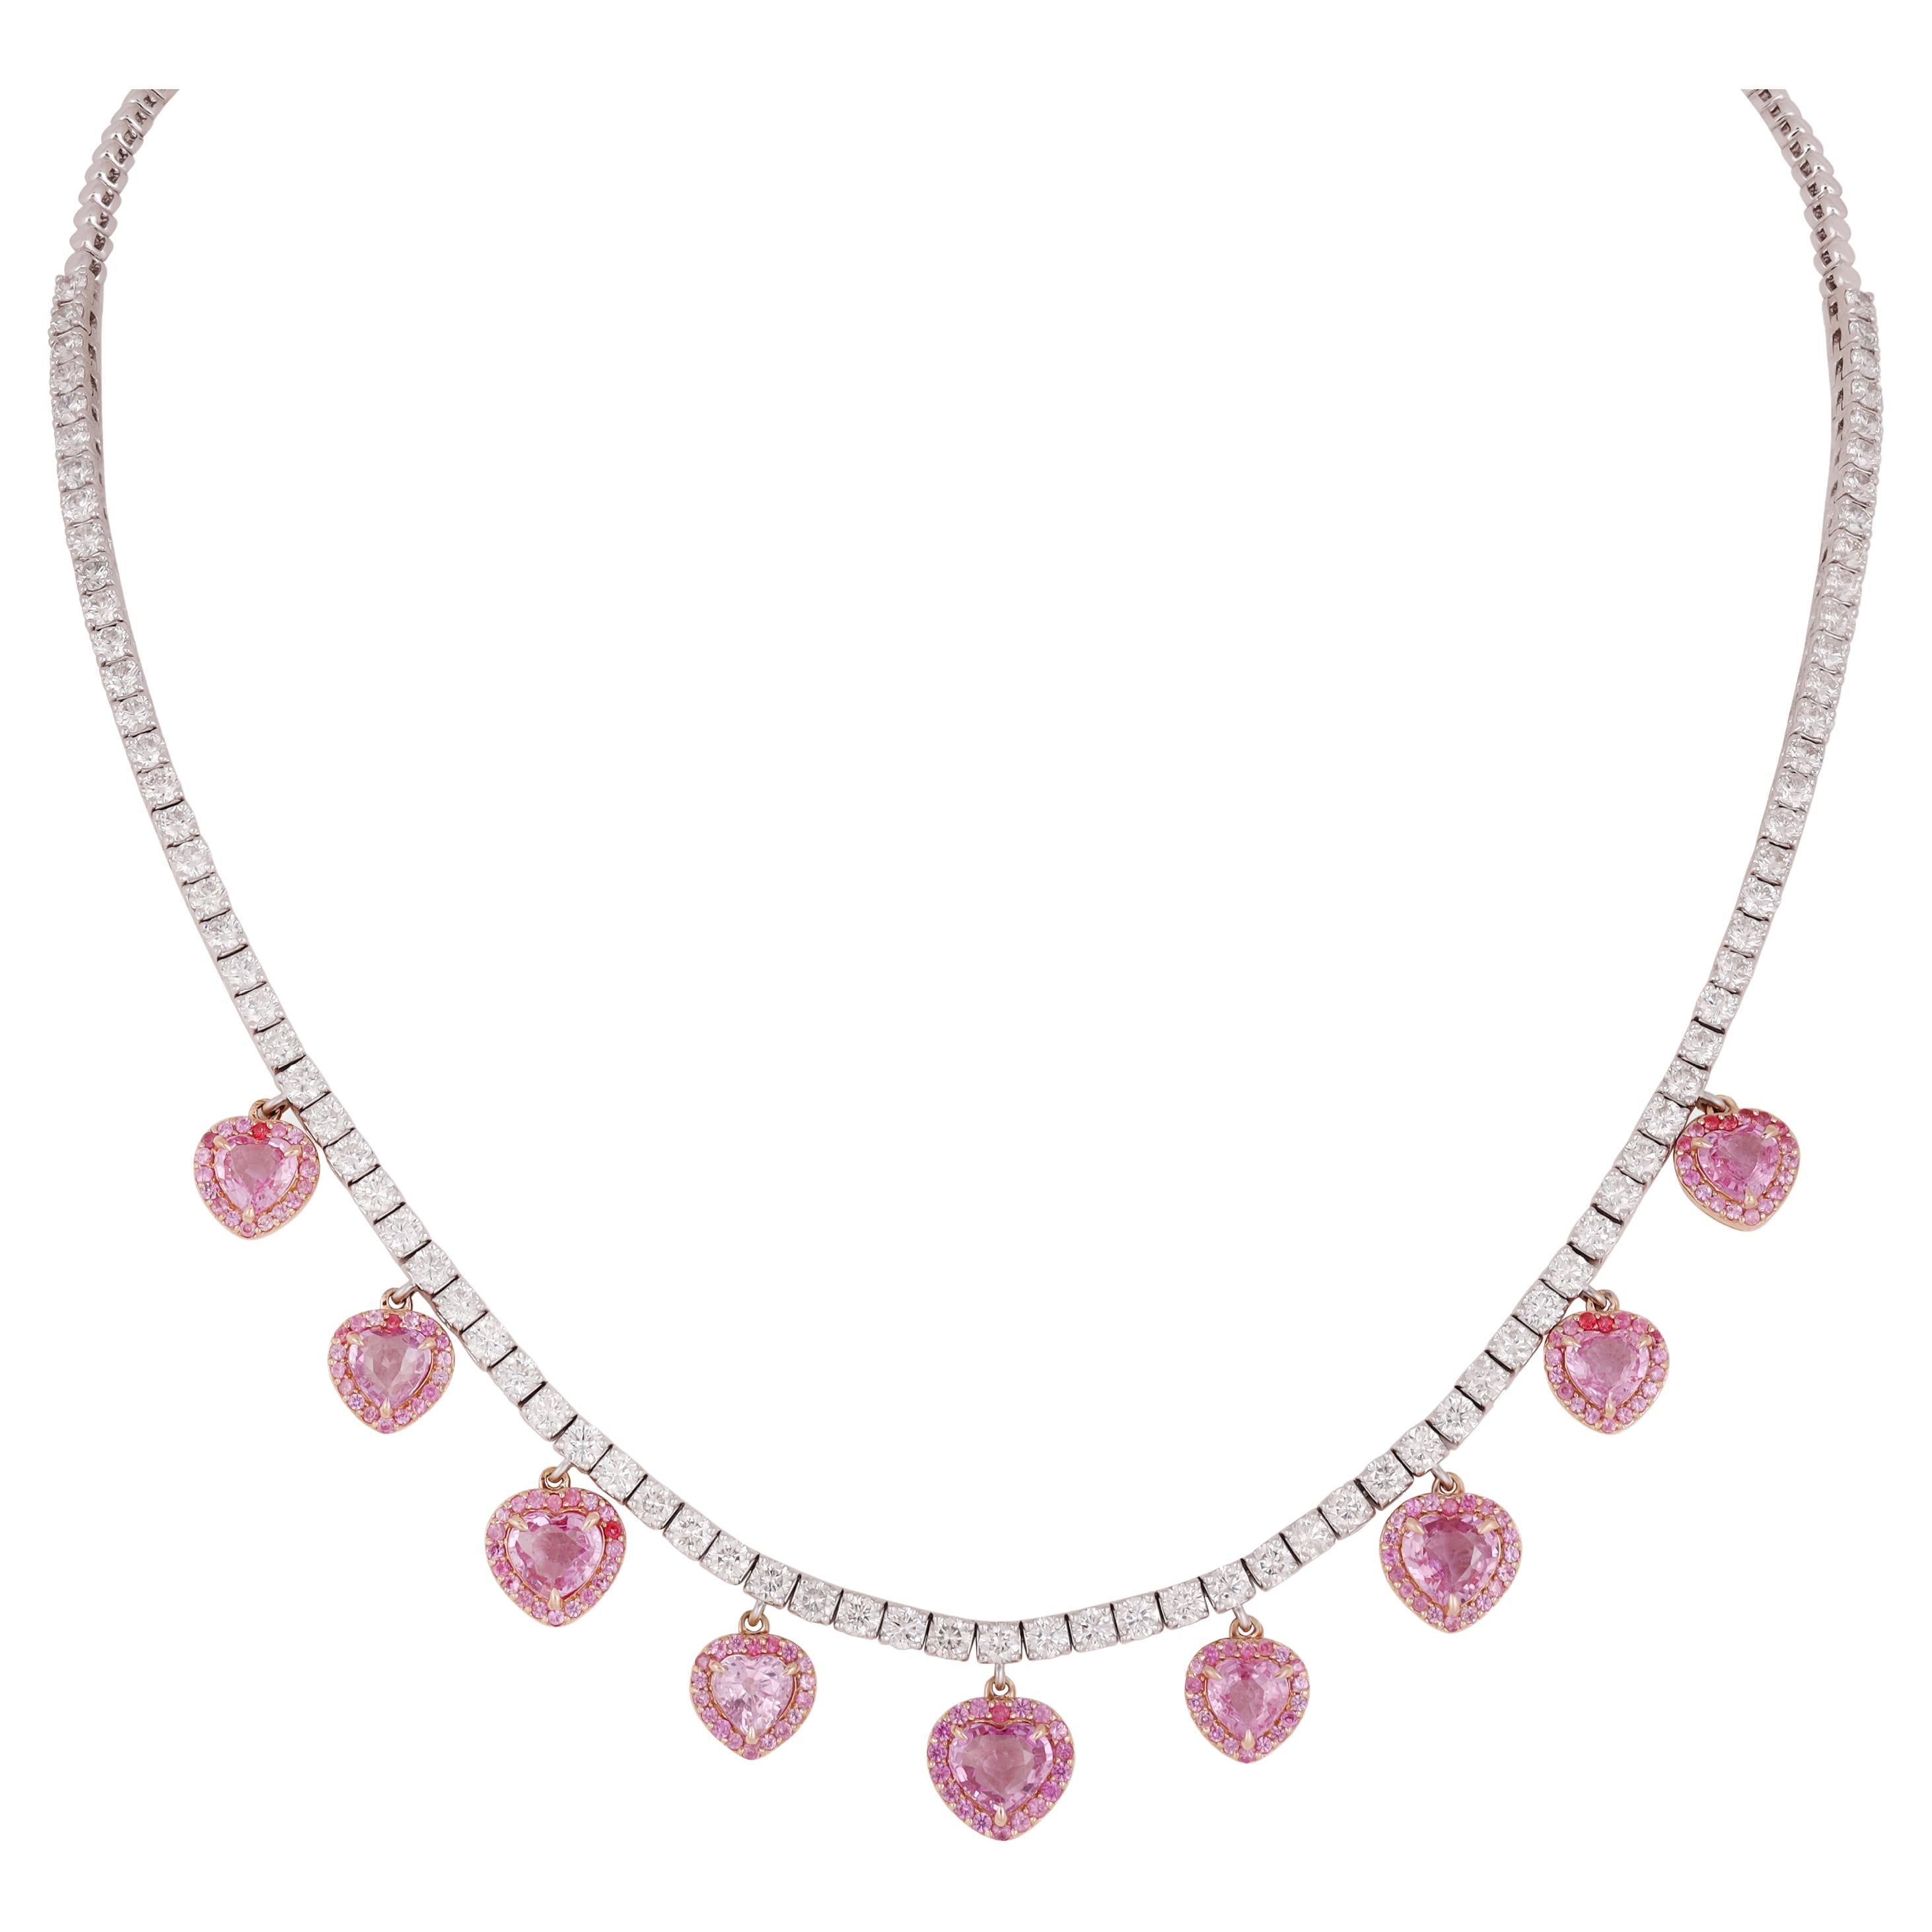 6.59 Carat Pink Sapphire & Diamond Chain Necklace in 18k White Gold